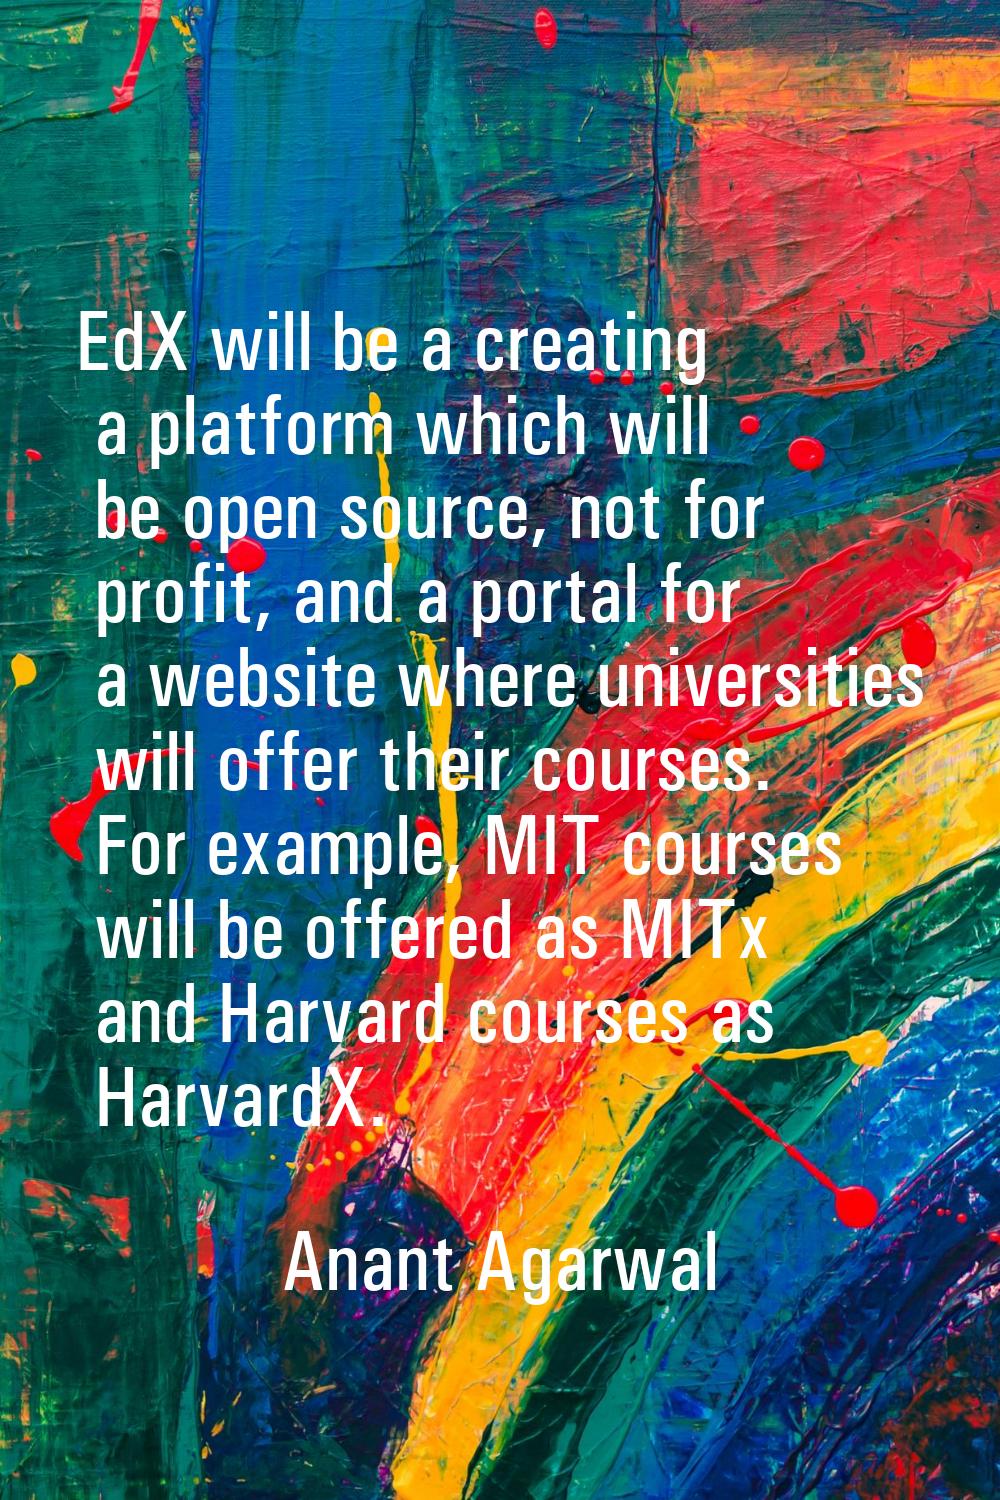 EdX will be a creating a platform which will be open source, not for profit, and a portal for a web